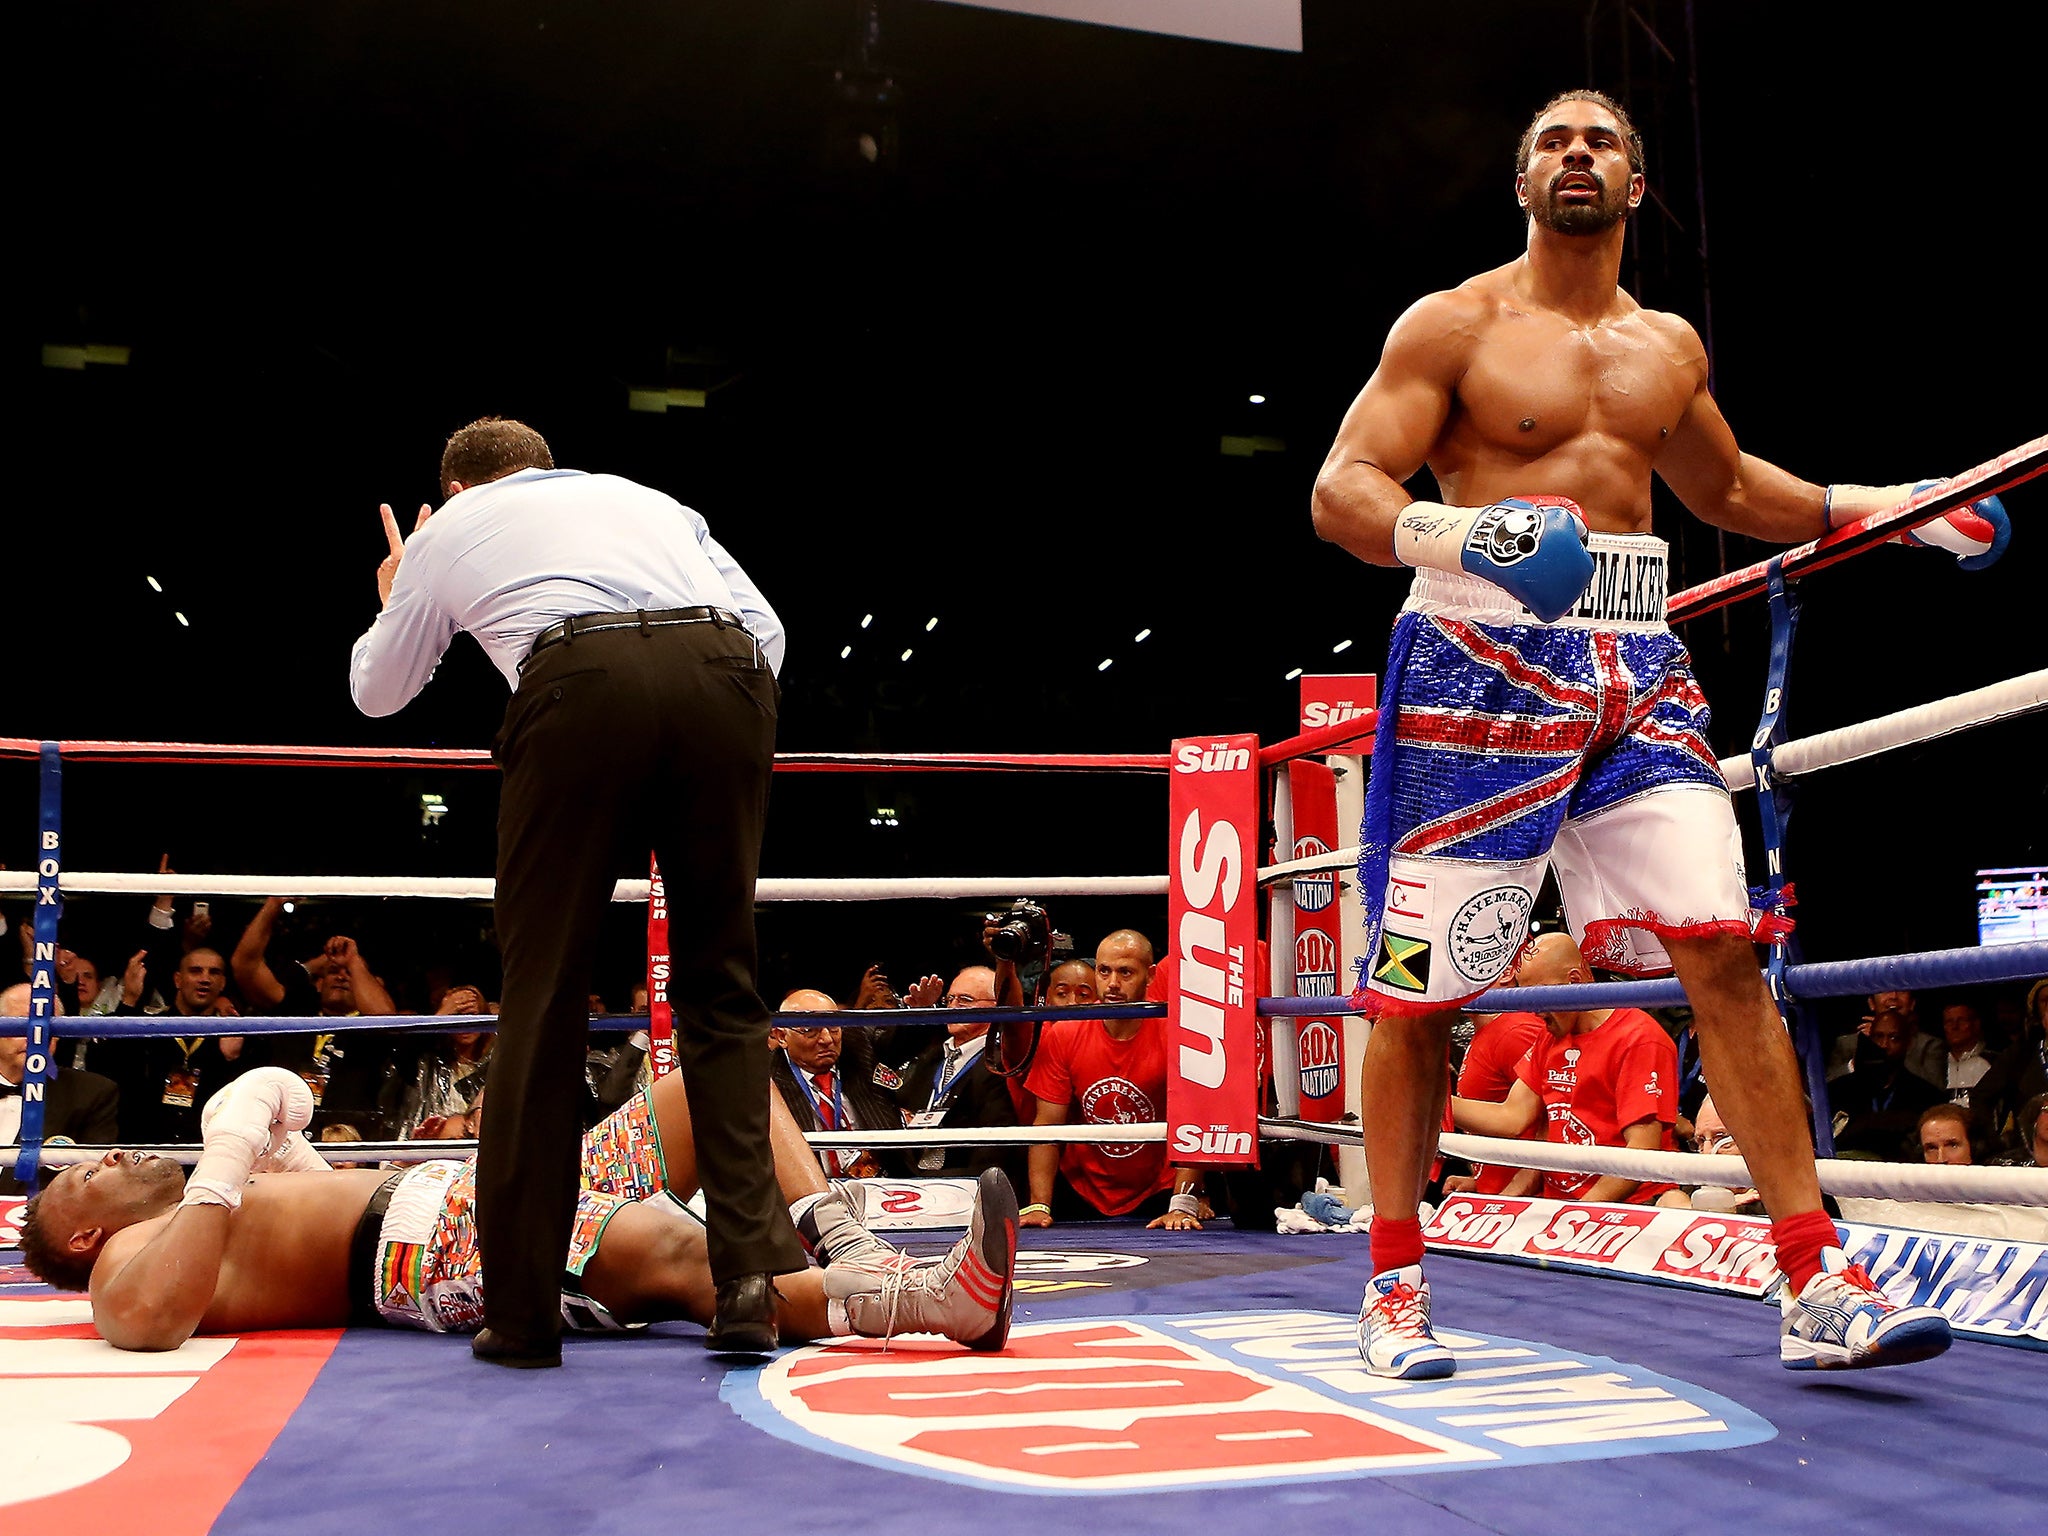 Haye has not fought since his 2012 victory over Dereck Chisora